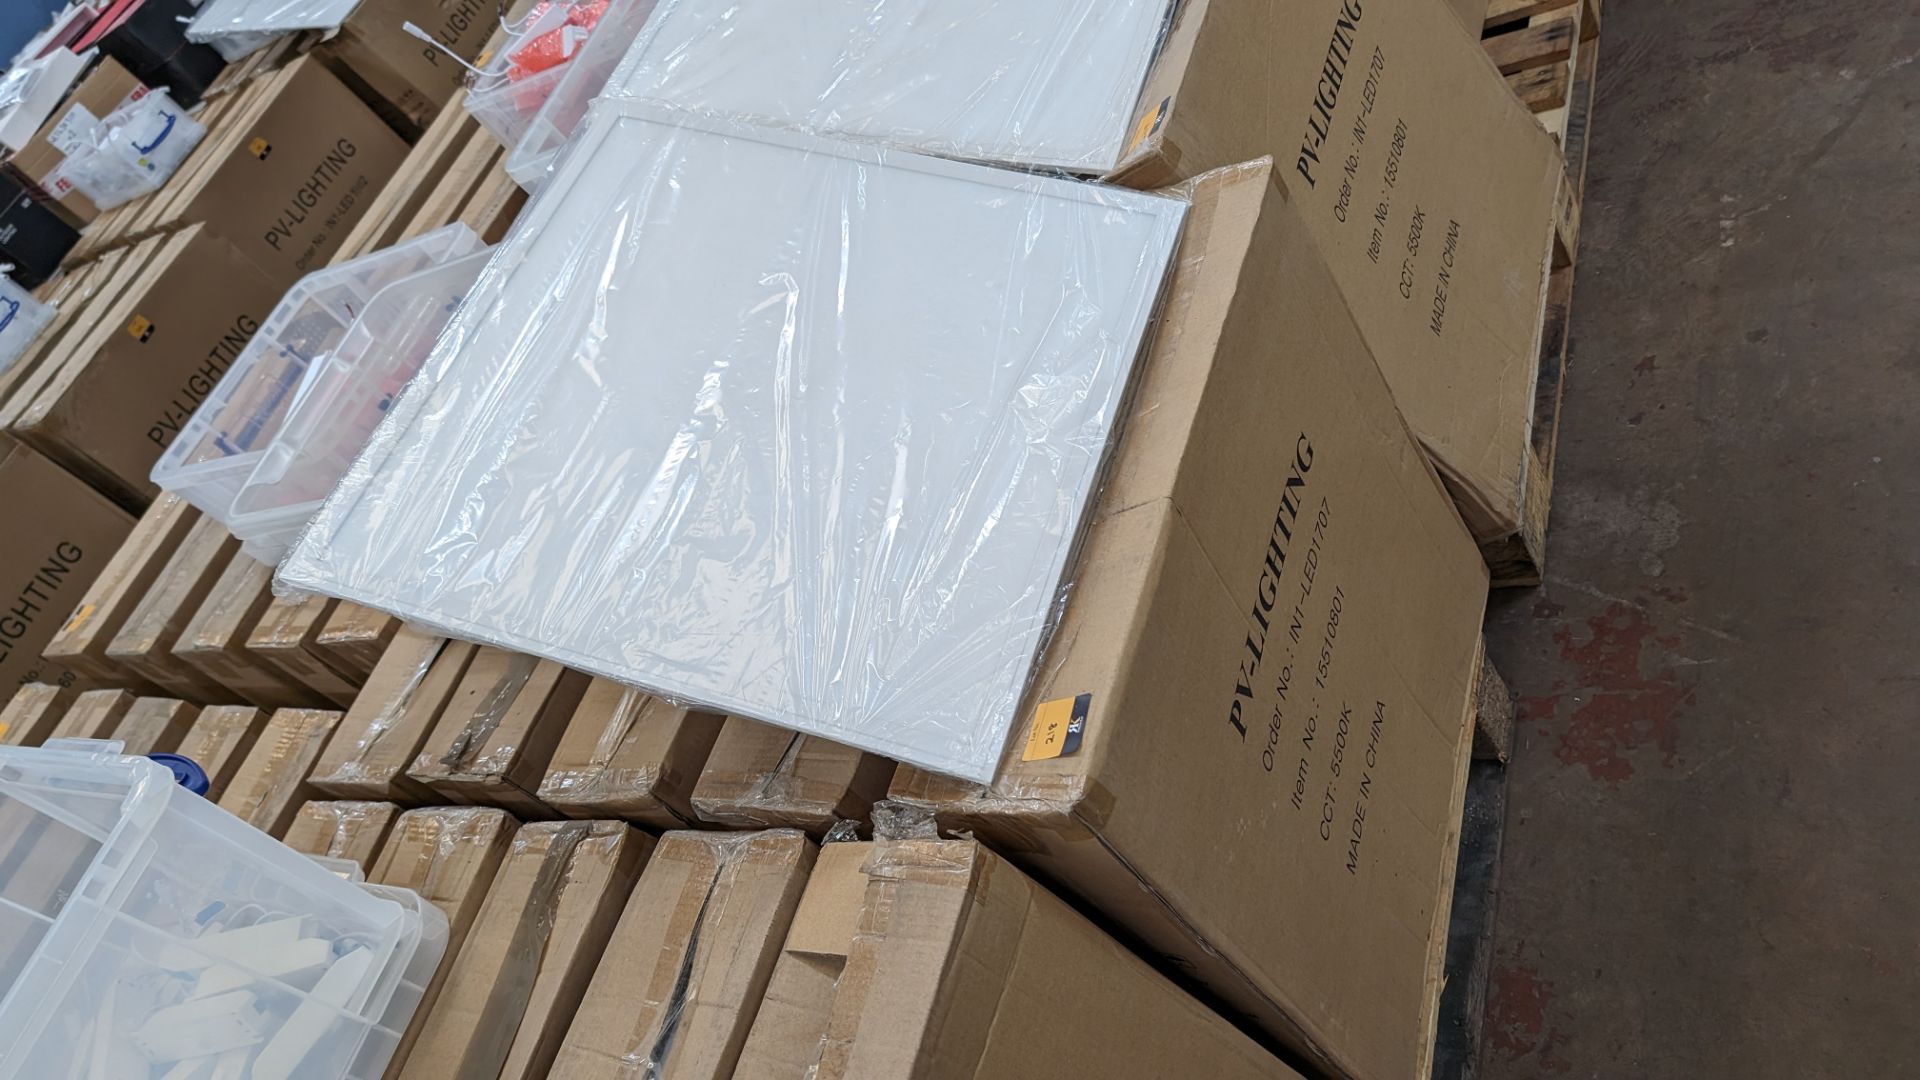 20 off 595mm x 595mm 32/36w 5500k 4320 lumens cold white LED lighting panels. This lot comprises 5